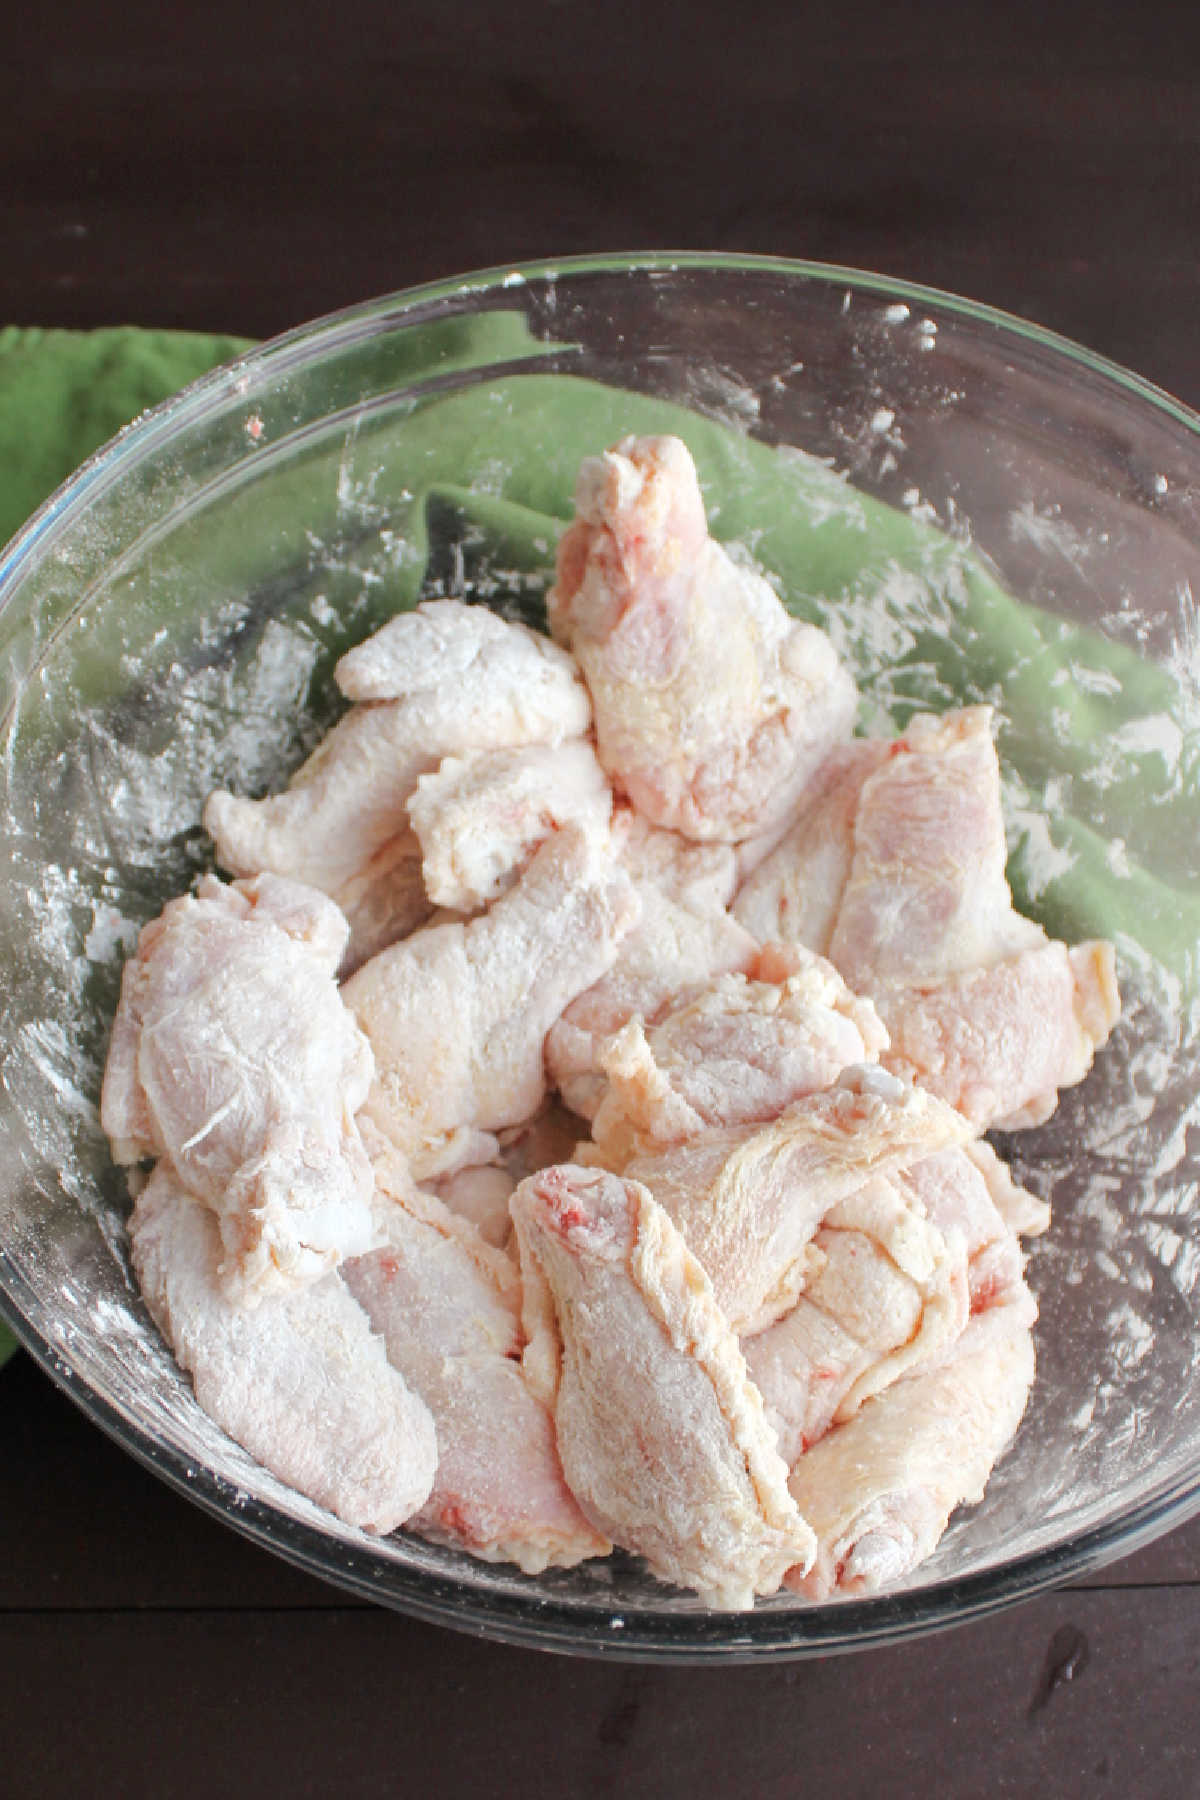 Wing pieces getting coated in spices, corn starch and baking soda in mixing bowl.